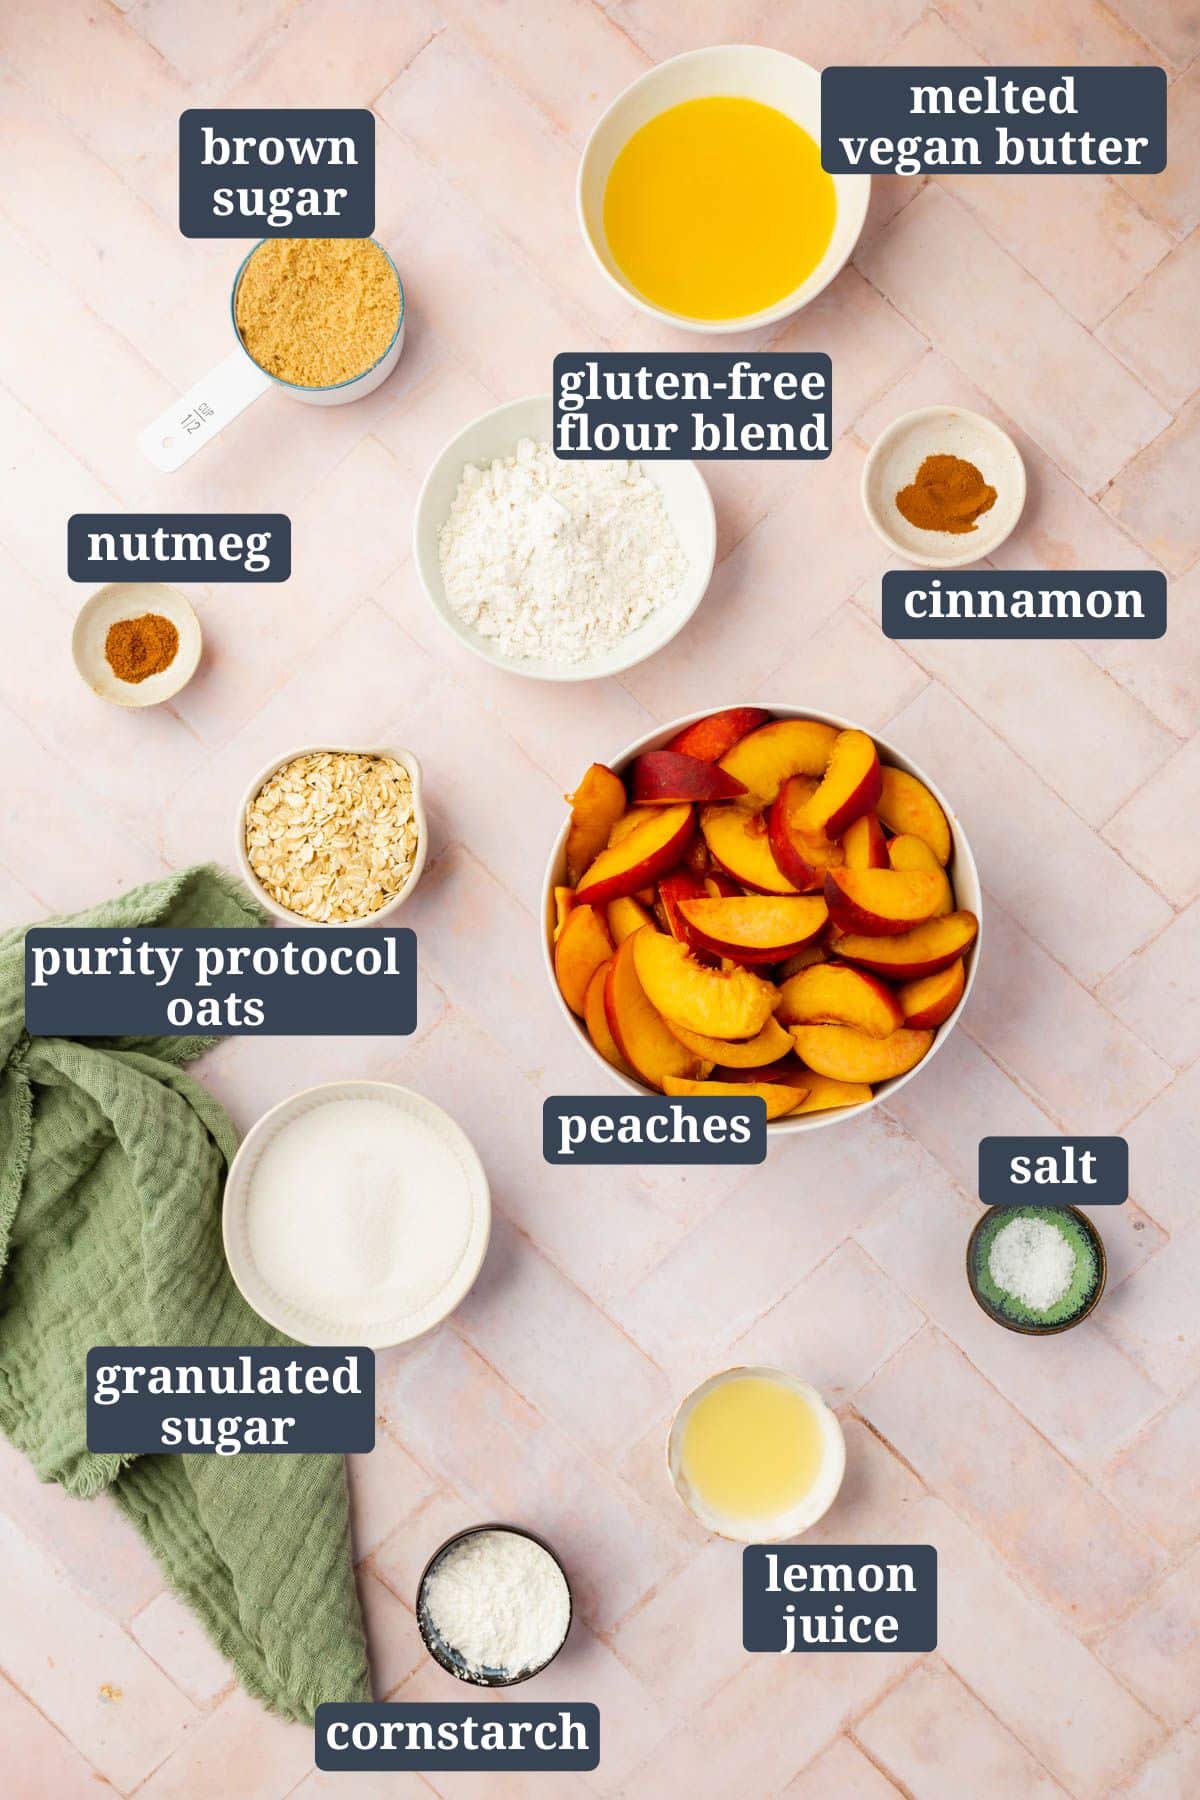 Ingredients mise en placed in small bowls to make gluten-free vegan peach crisp with text overlay on each bowl stating the ingredient.